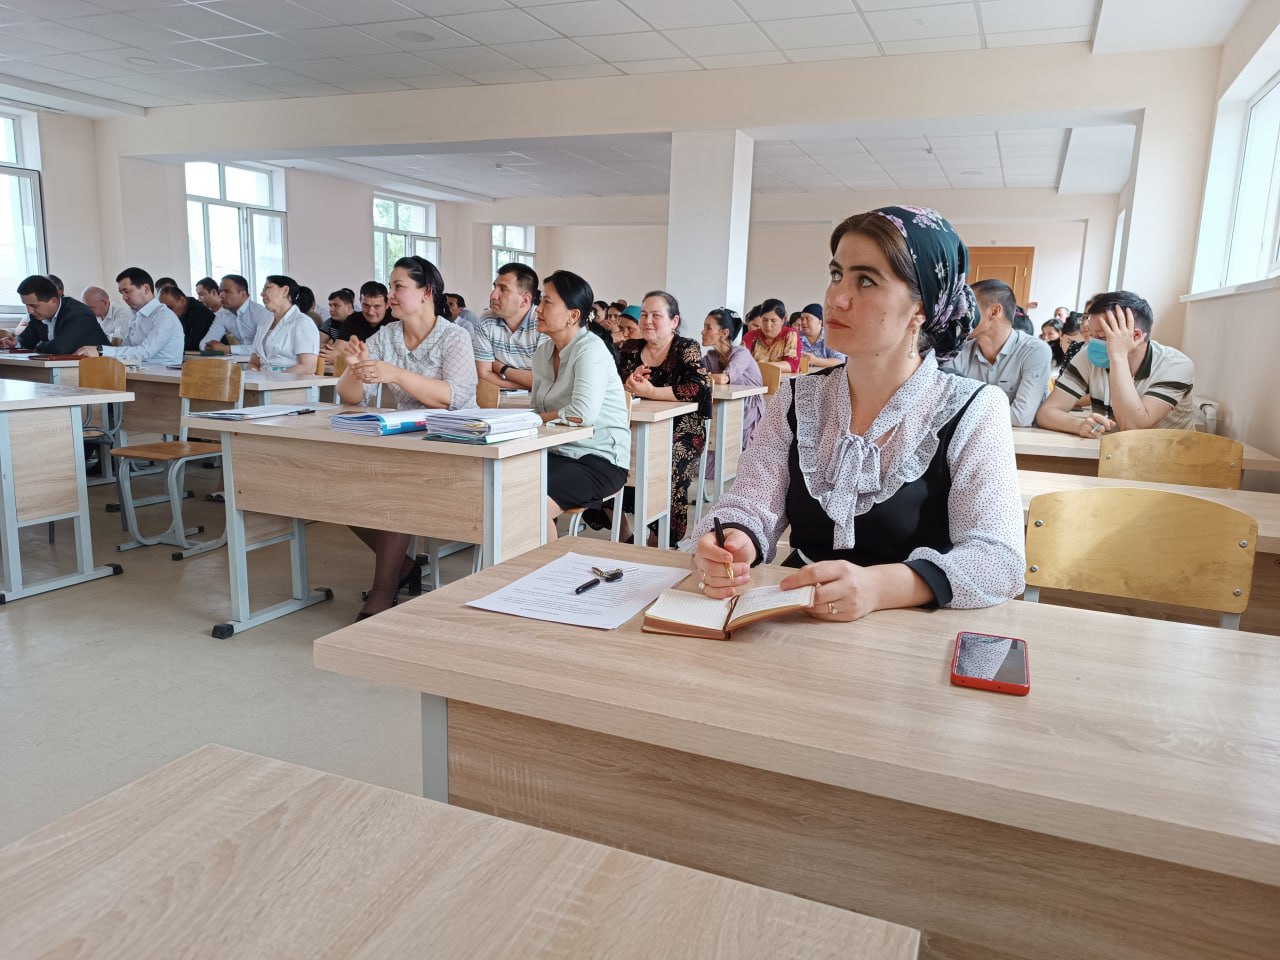 THE ADMINISTRATION OF URGENCH STATE PEDAGOGICAL INSTITUTE AND THE PRIMARY TRADE UNION COMMITTEE OF THE INSTITUTE HELD A CONFERENCE DEDICATED TO THE APPROVAL OF THE COLLECTIVE BARGAINING AGREEMENT FOR THE YEARS 2023-2025